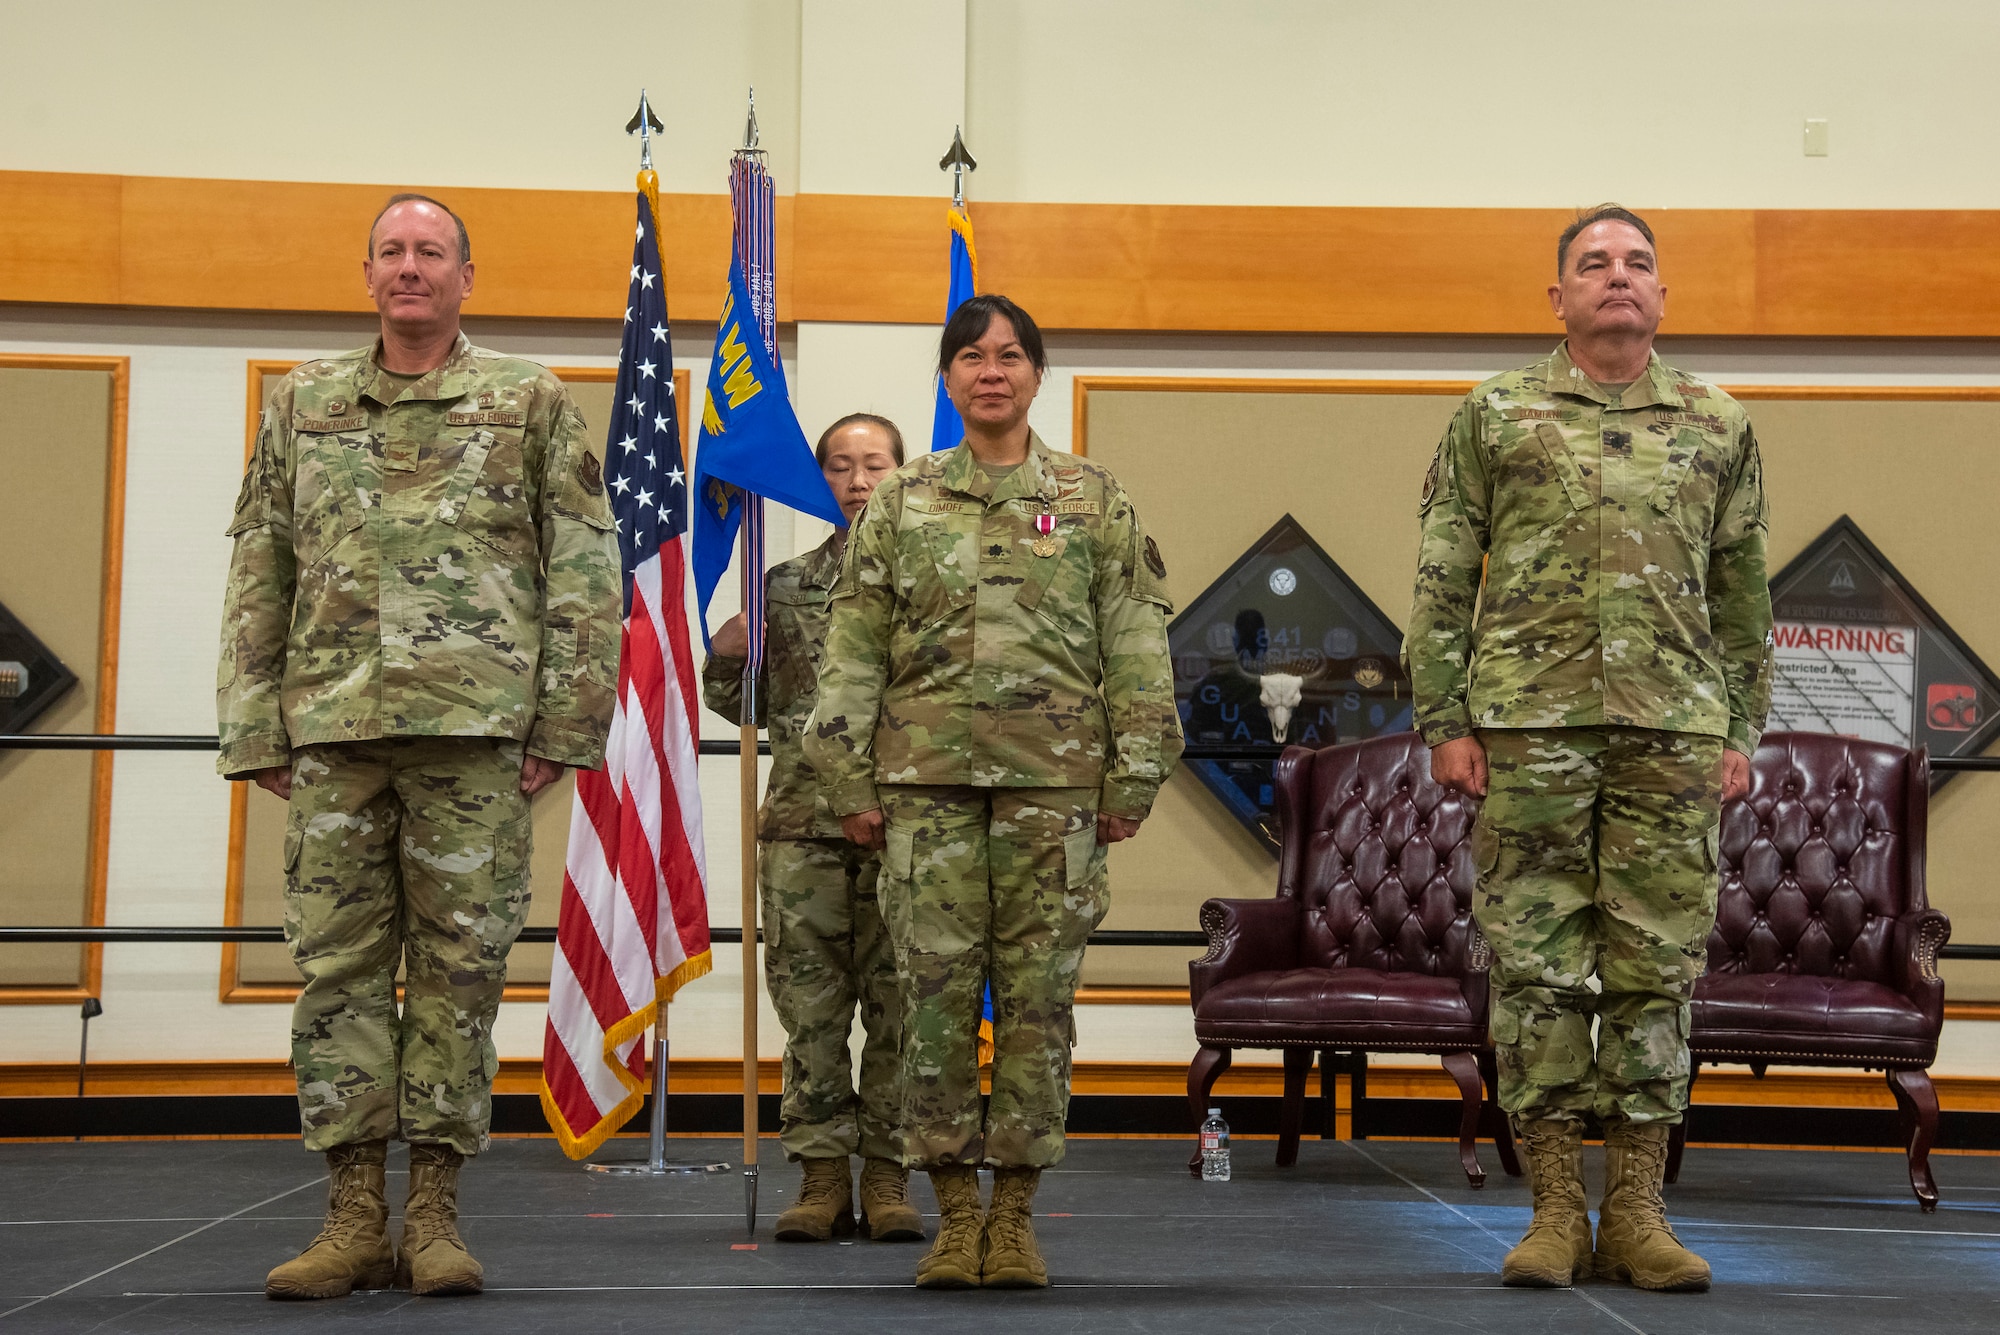 From left, Col. Mark Pomerinke, 341st Medical Group commander; Lt. Col. Michelle Dimoff, 341st Operational Medical Readiness Squadron outgoing commander; and Lt. Col. Darren Damiani, 341st OMRS incoming commander, await the ceremonial portion of a change of command at Malmstrom Air Force Base, Mont., June 16, 2021.